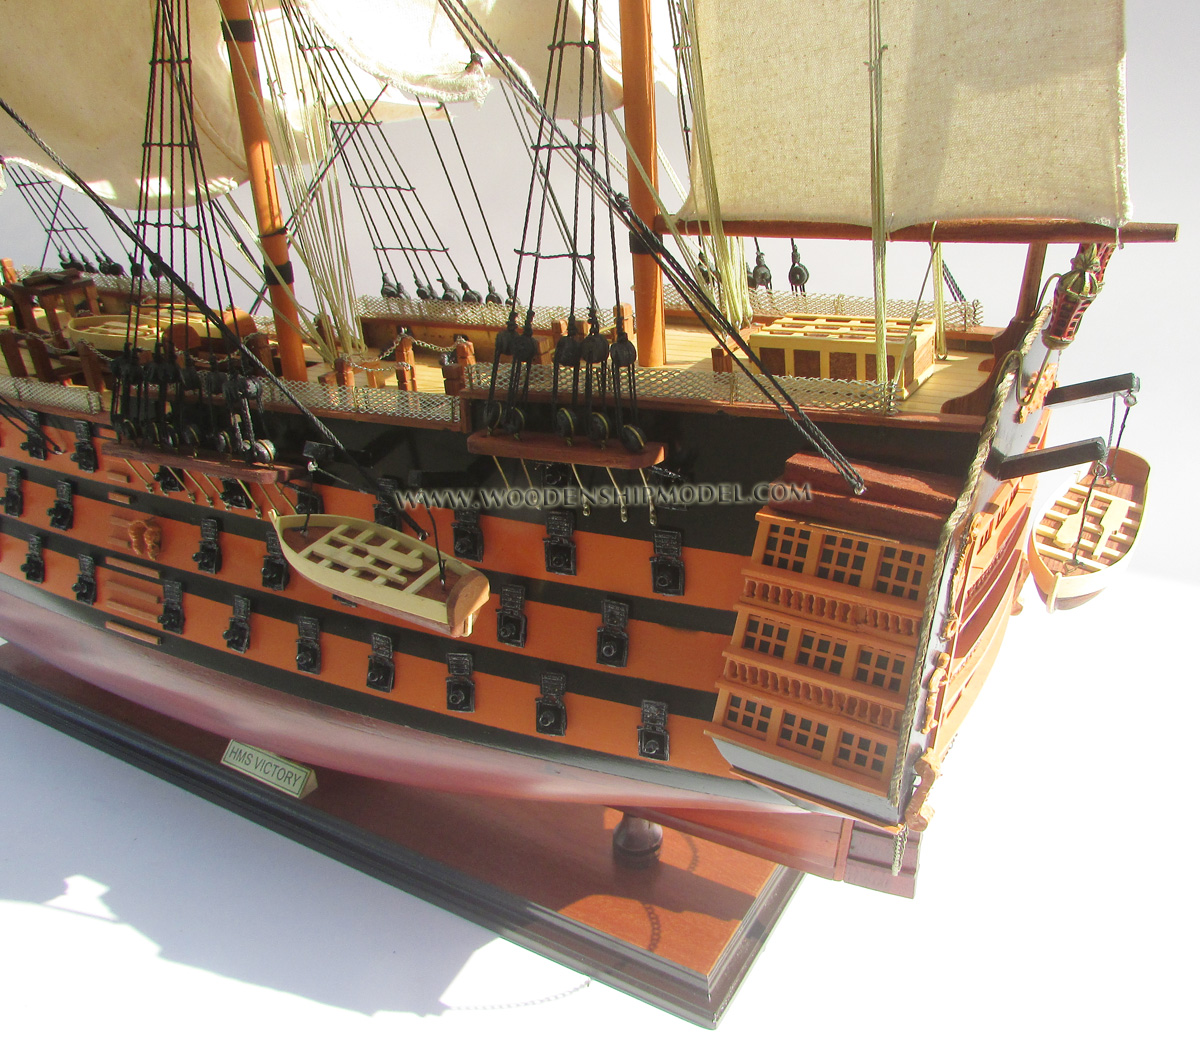 Model HMS Victory ready for display, scale HMS Victory model ship, ship model HMS Victory, wooden ship model HMS Victory, hand-made ship model HMS Victory, display ship model HMS Victory, HMS Victory model, qualily model ship HMS Victory, woodenshipmodel, woodenmodelboat, gianhien, gia nhien co., ltd, gia nhien co model boat and ship builder